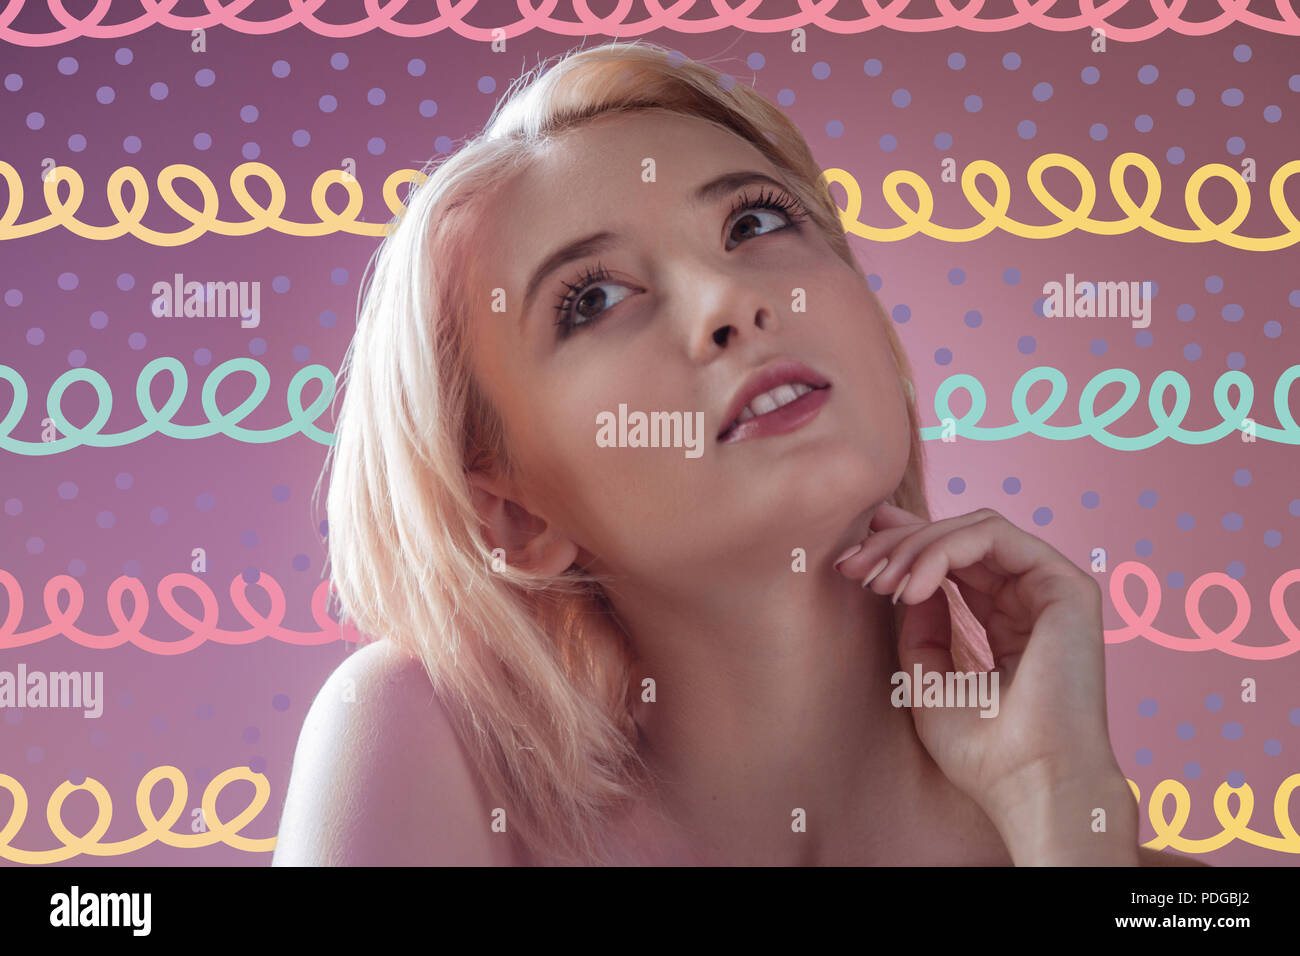 Beautiful and adorable woman dreaming Beautiful mind. Stock Photo